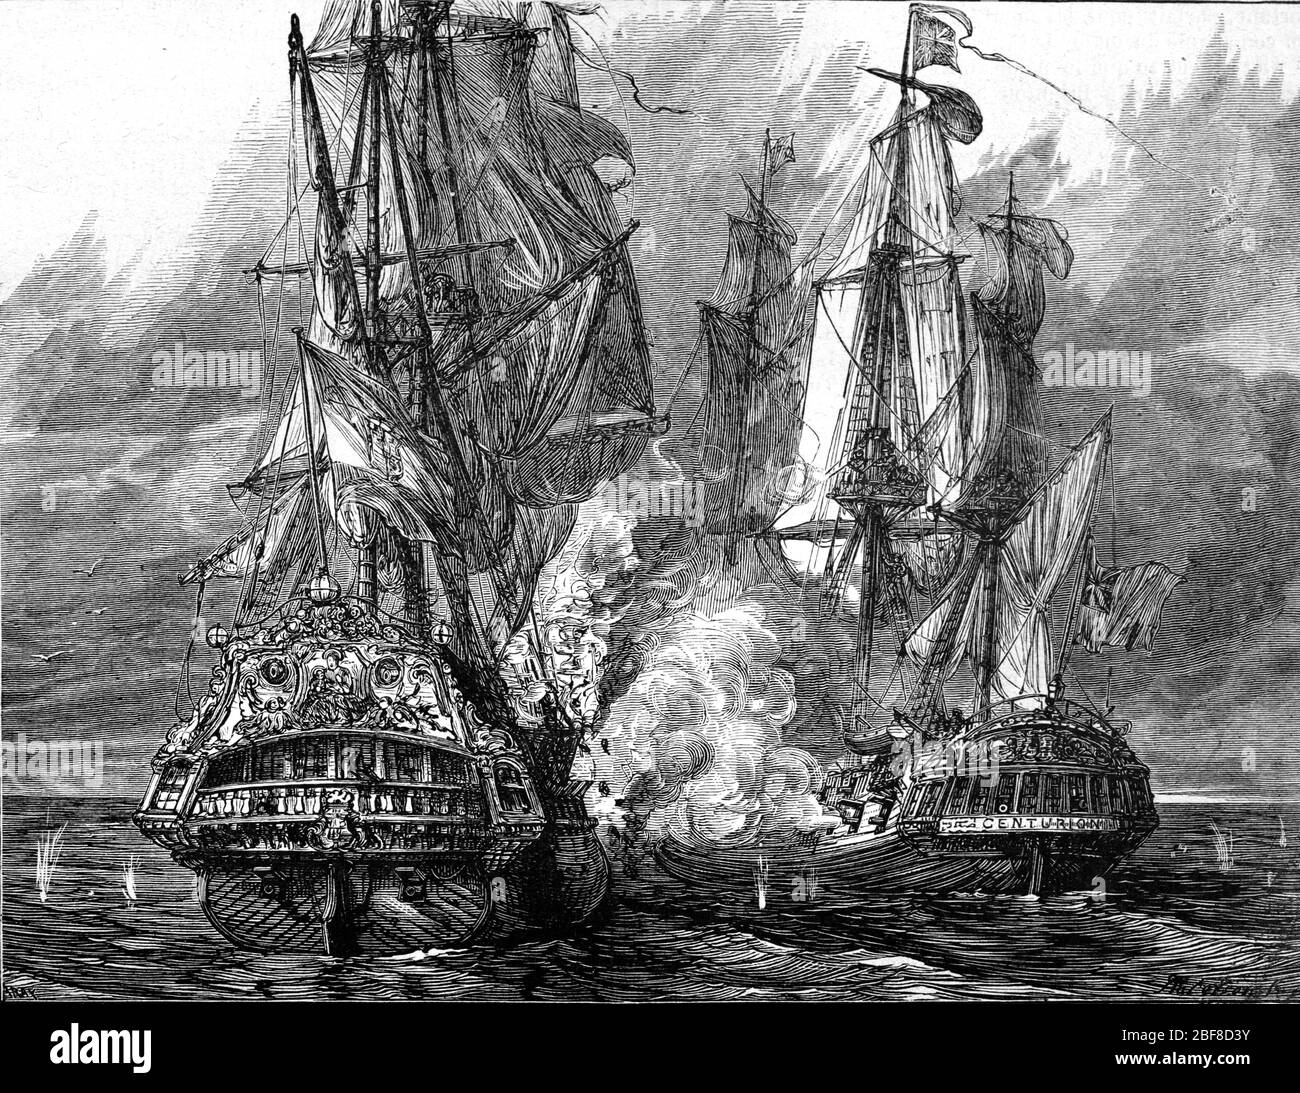 George Anson, Captain of HMS Centurion Warship, in Sea Battle & Capture of Spanish Galleon or Merchant Ship Nuestra Senora del Monte Carmelo (in 1741) off Coast of South America. Vintage or Old Illustration or Engraving 1889 Stock Photo